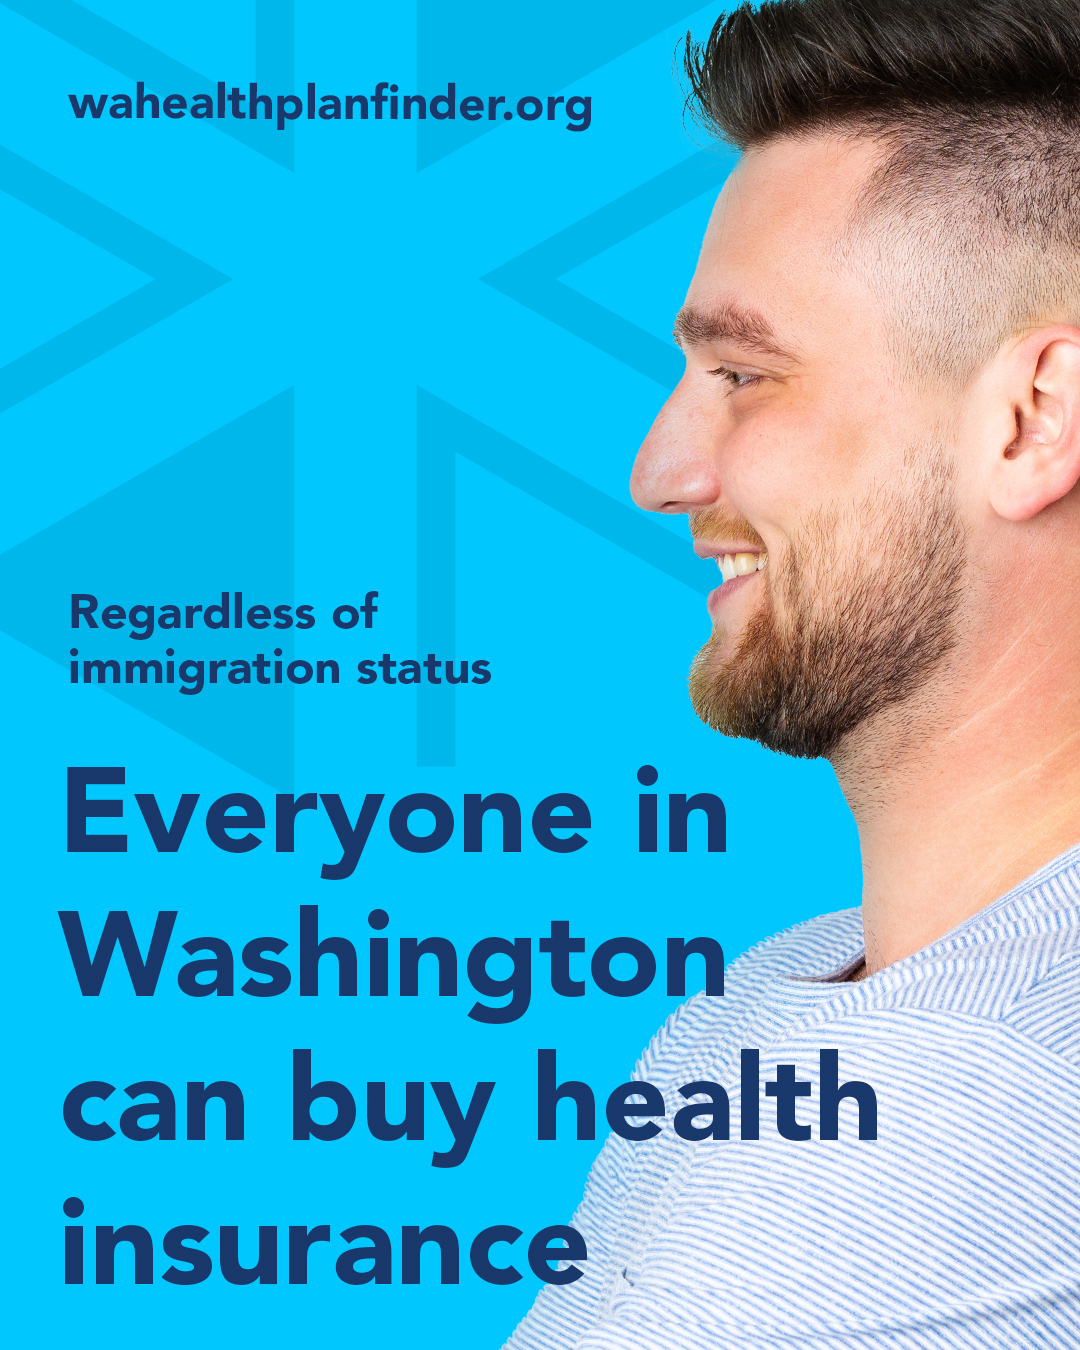 Wahealthplanfinder.org. Regardless of immigration status. Everyone in Washington can buy health insurance.